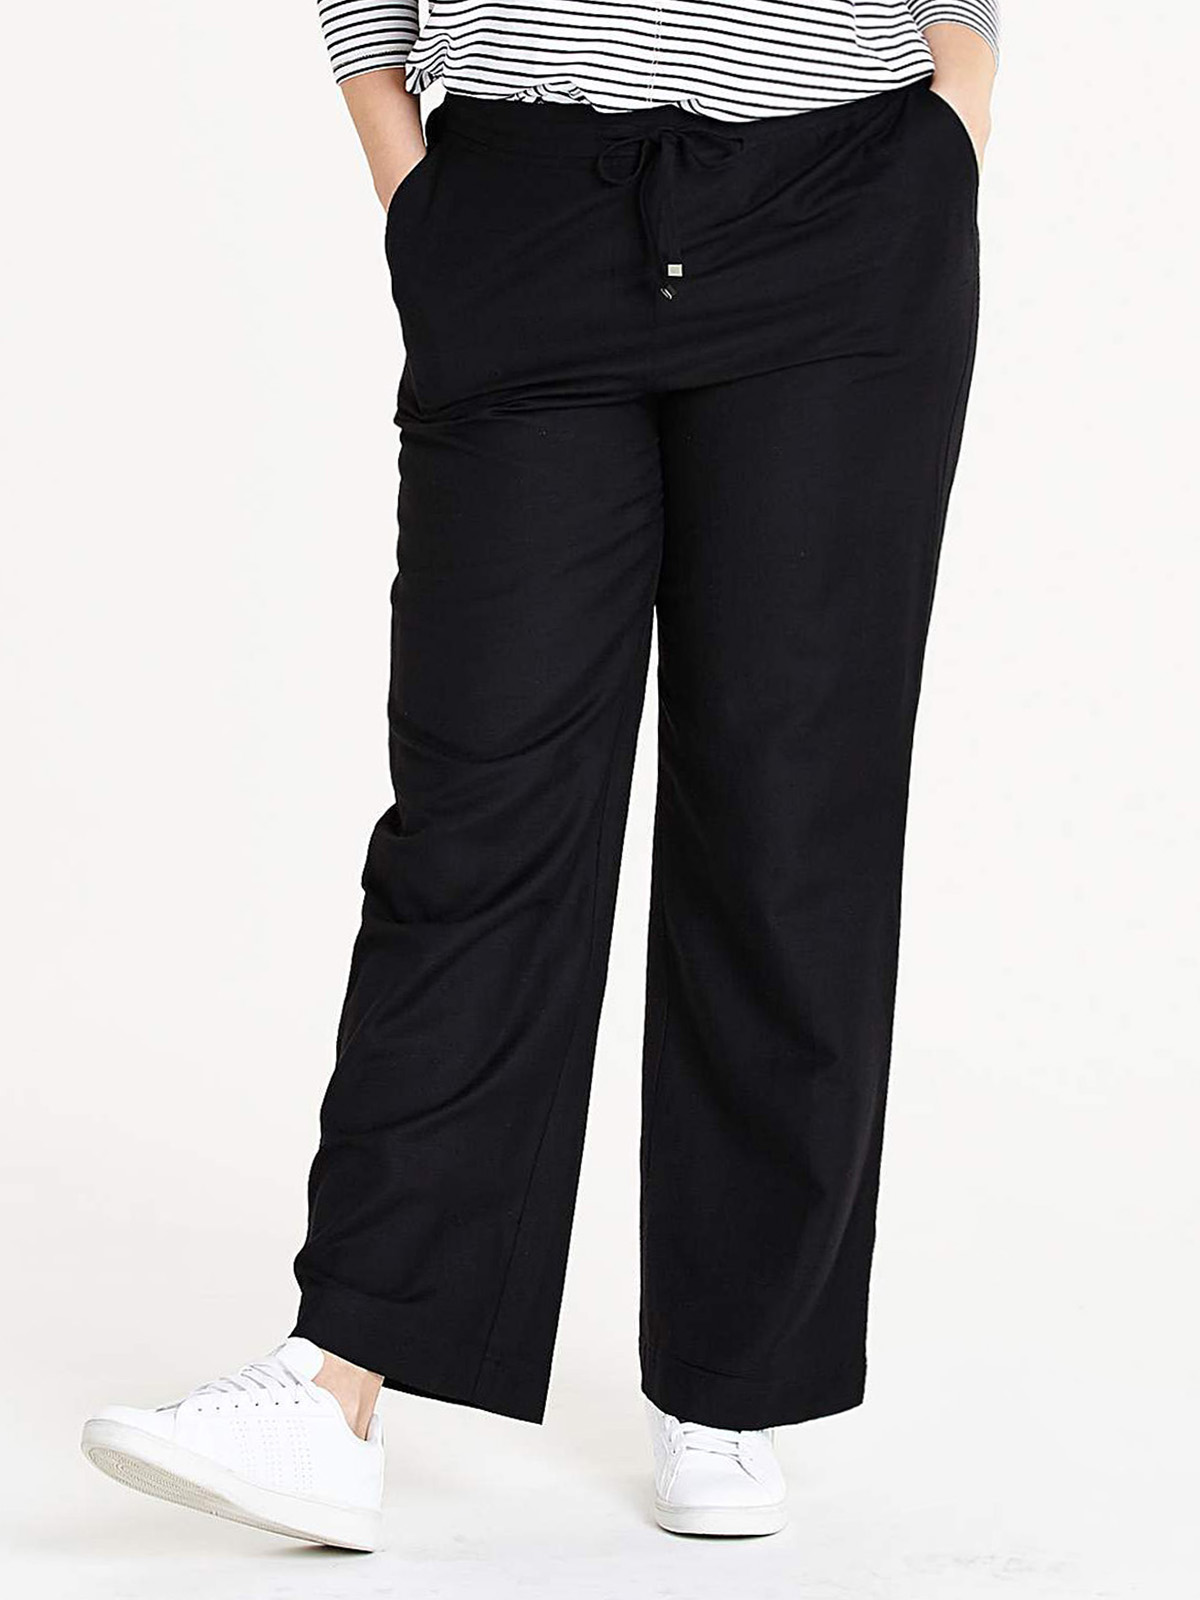 Capsule - - Capsule BLACK Linen Blend Easy Care Trousers - Size 10 to 32